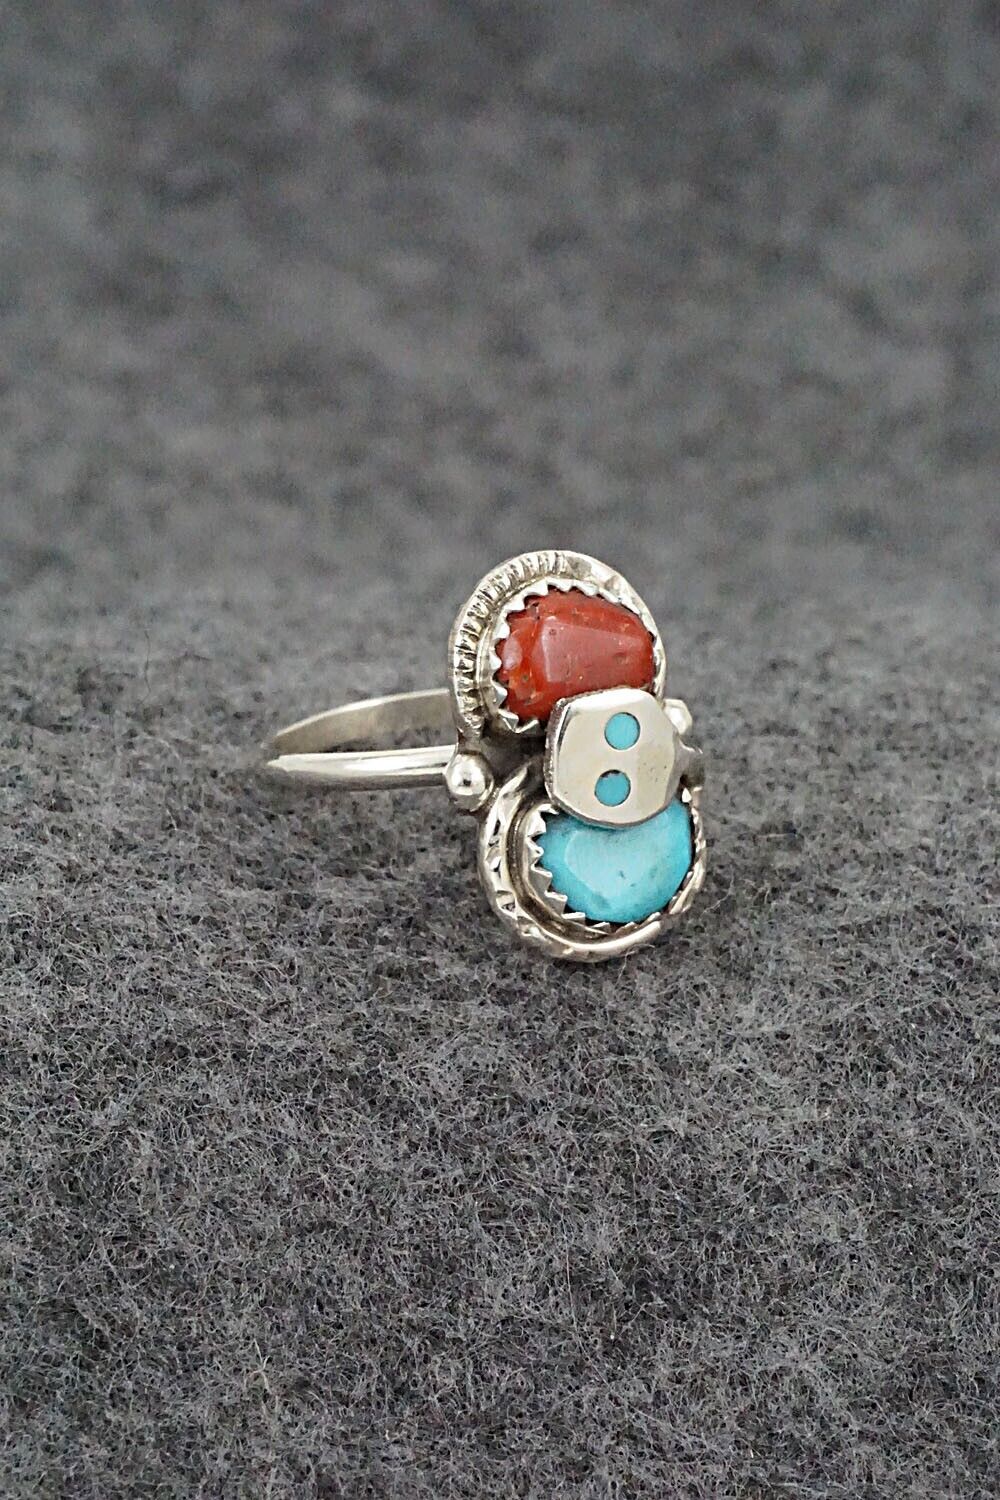 Turquoise, Coral & Sterling Silver Ring - Joy Calavaza - Size 5.75